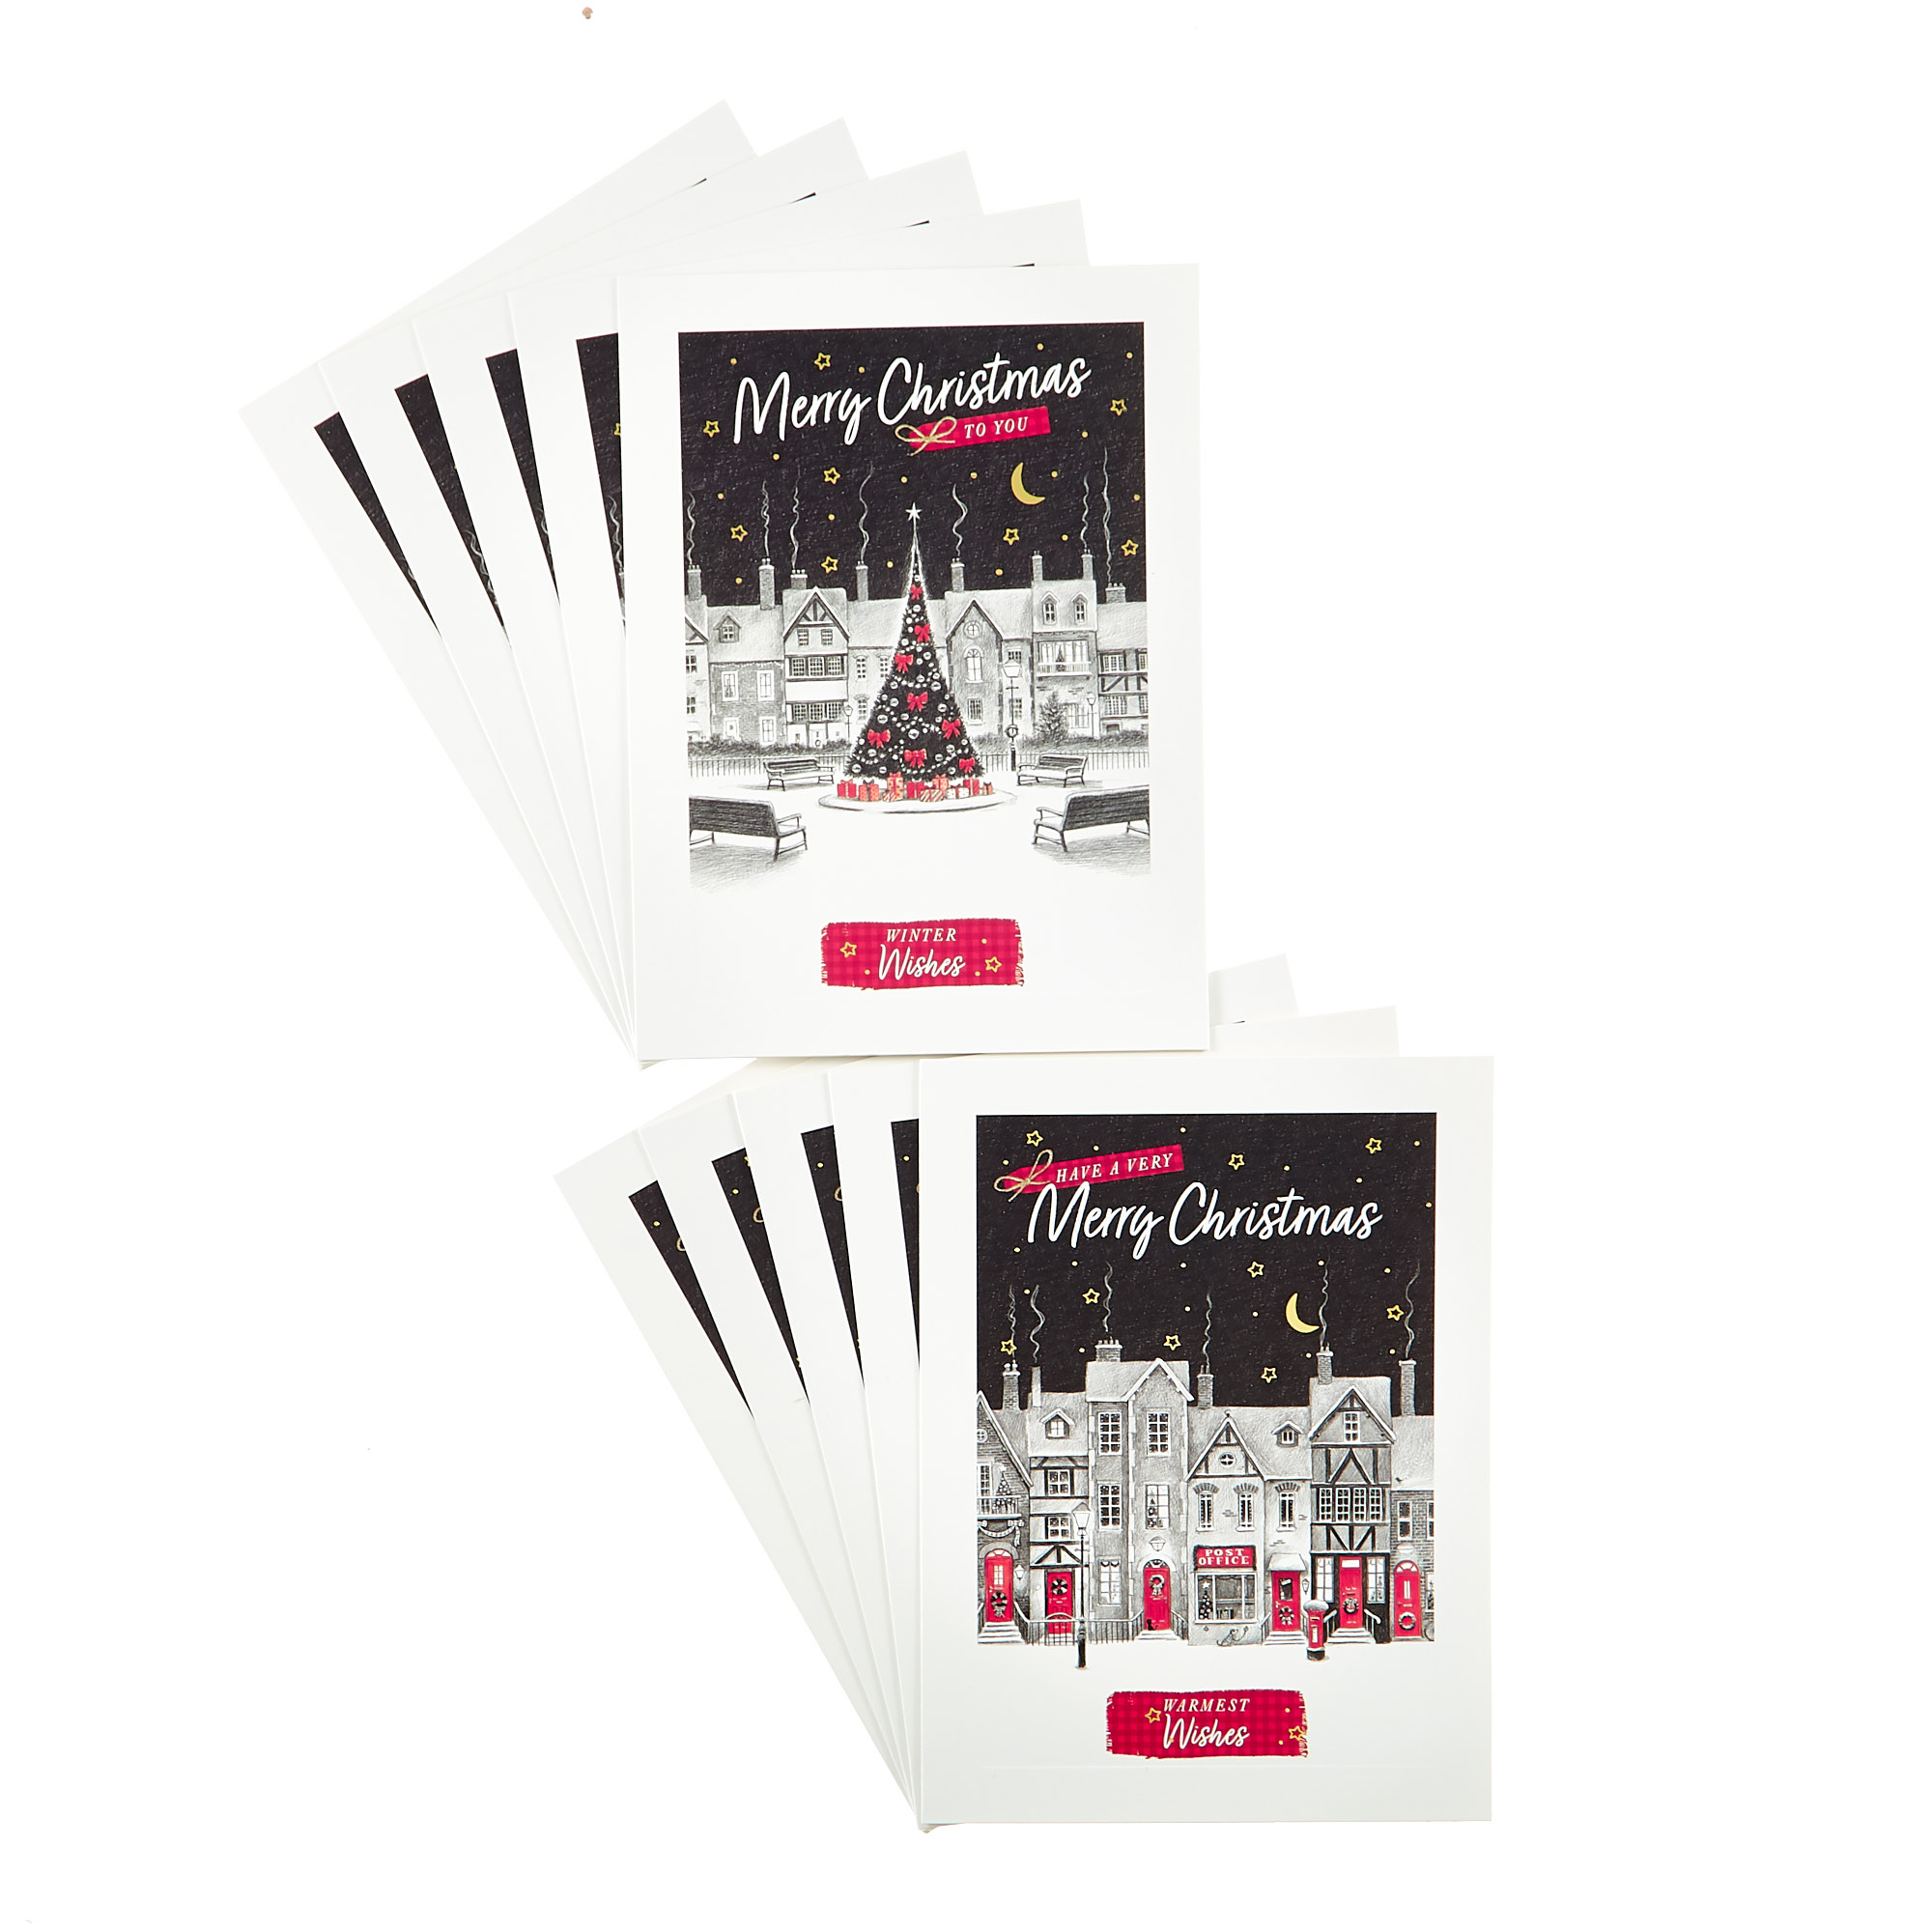 12 Deluxe Charity Boxed Christmas Cards - Snowy Villages (2 Designs)